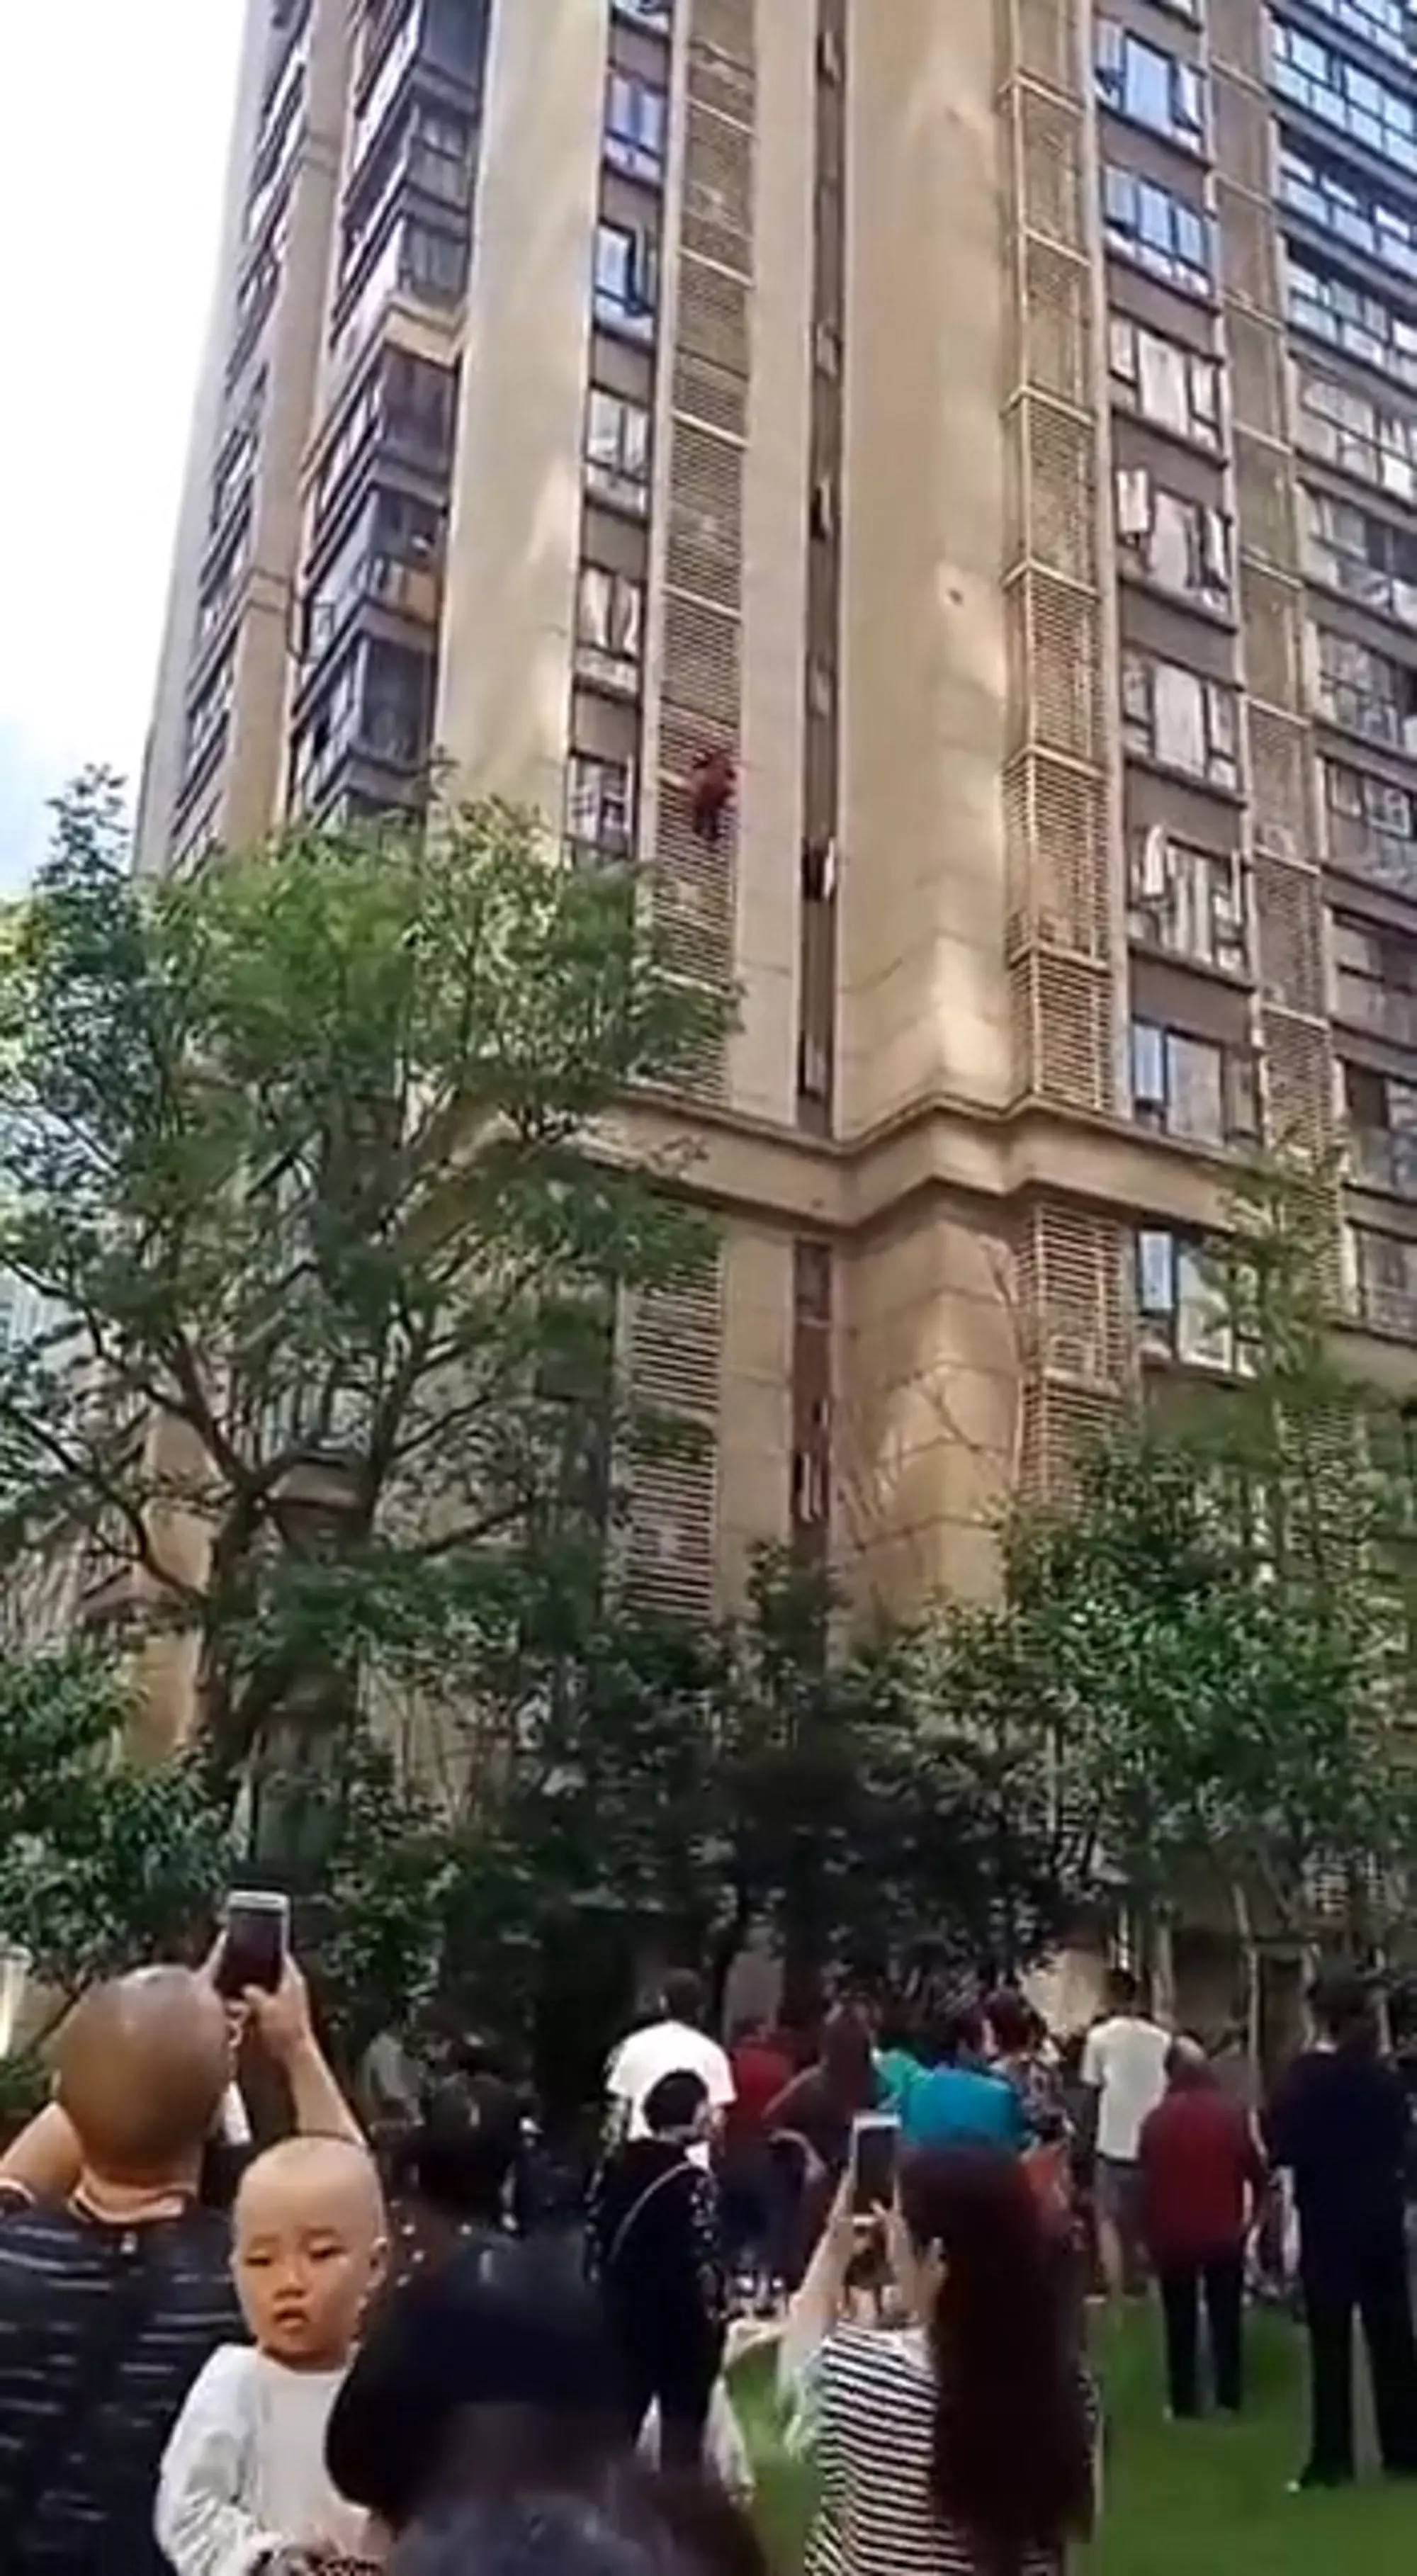 The 90-year-old woman climbing down the side of the high-rise tower block.